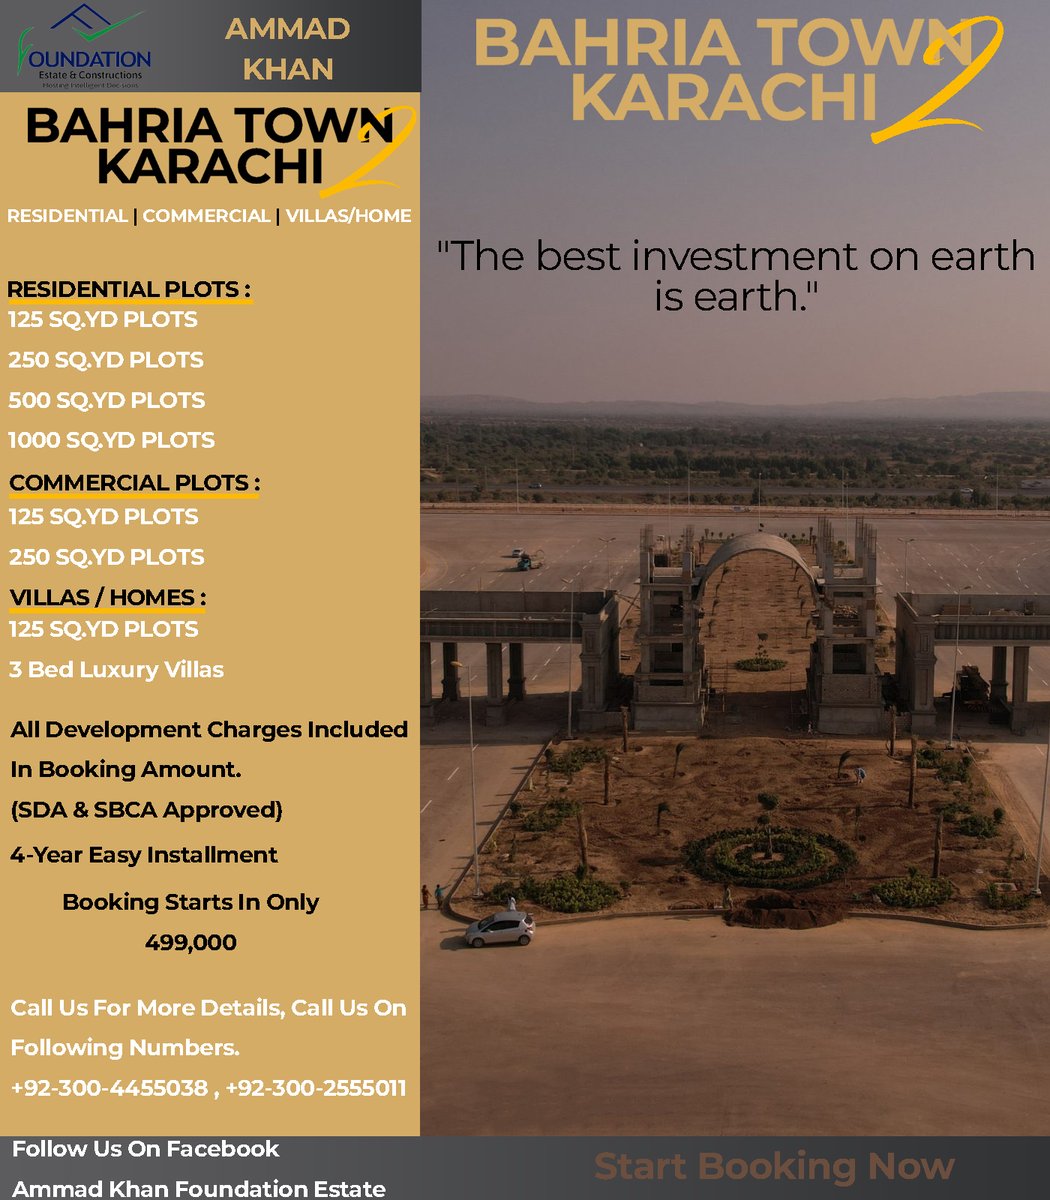 'The Best Investment On Earth Is Earth' 
Social Links : linktr.ee/ammad_khan
Email Add   : ammadkhan0945@gmail.com
For more details, call us at the following numbers ⬇️
+92-300-2555011
+92-300-4455038
#BahriaTownKarachi2 #BTK2 #BookNow #BookingOpen #BahriaTown #Karachi